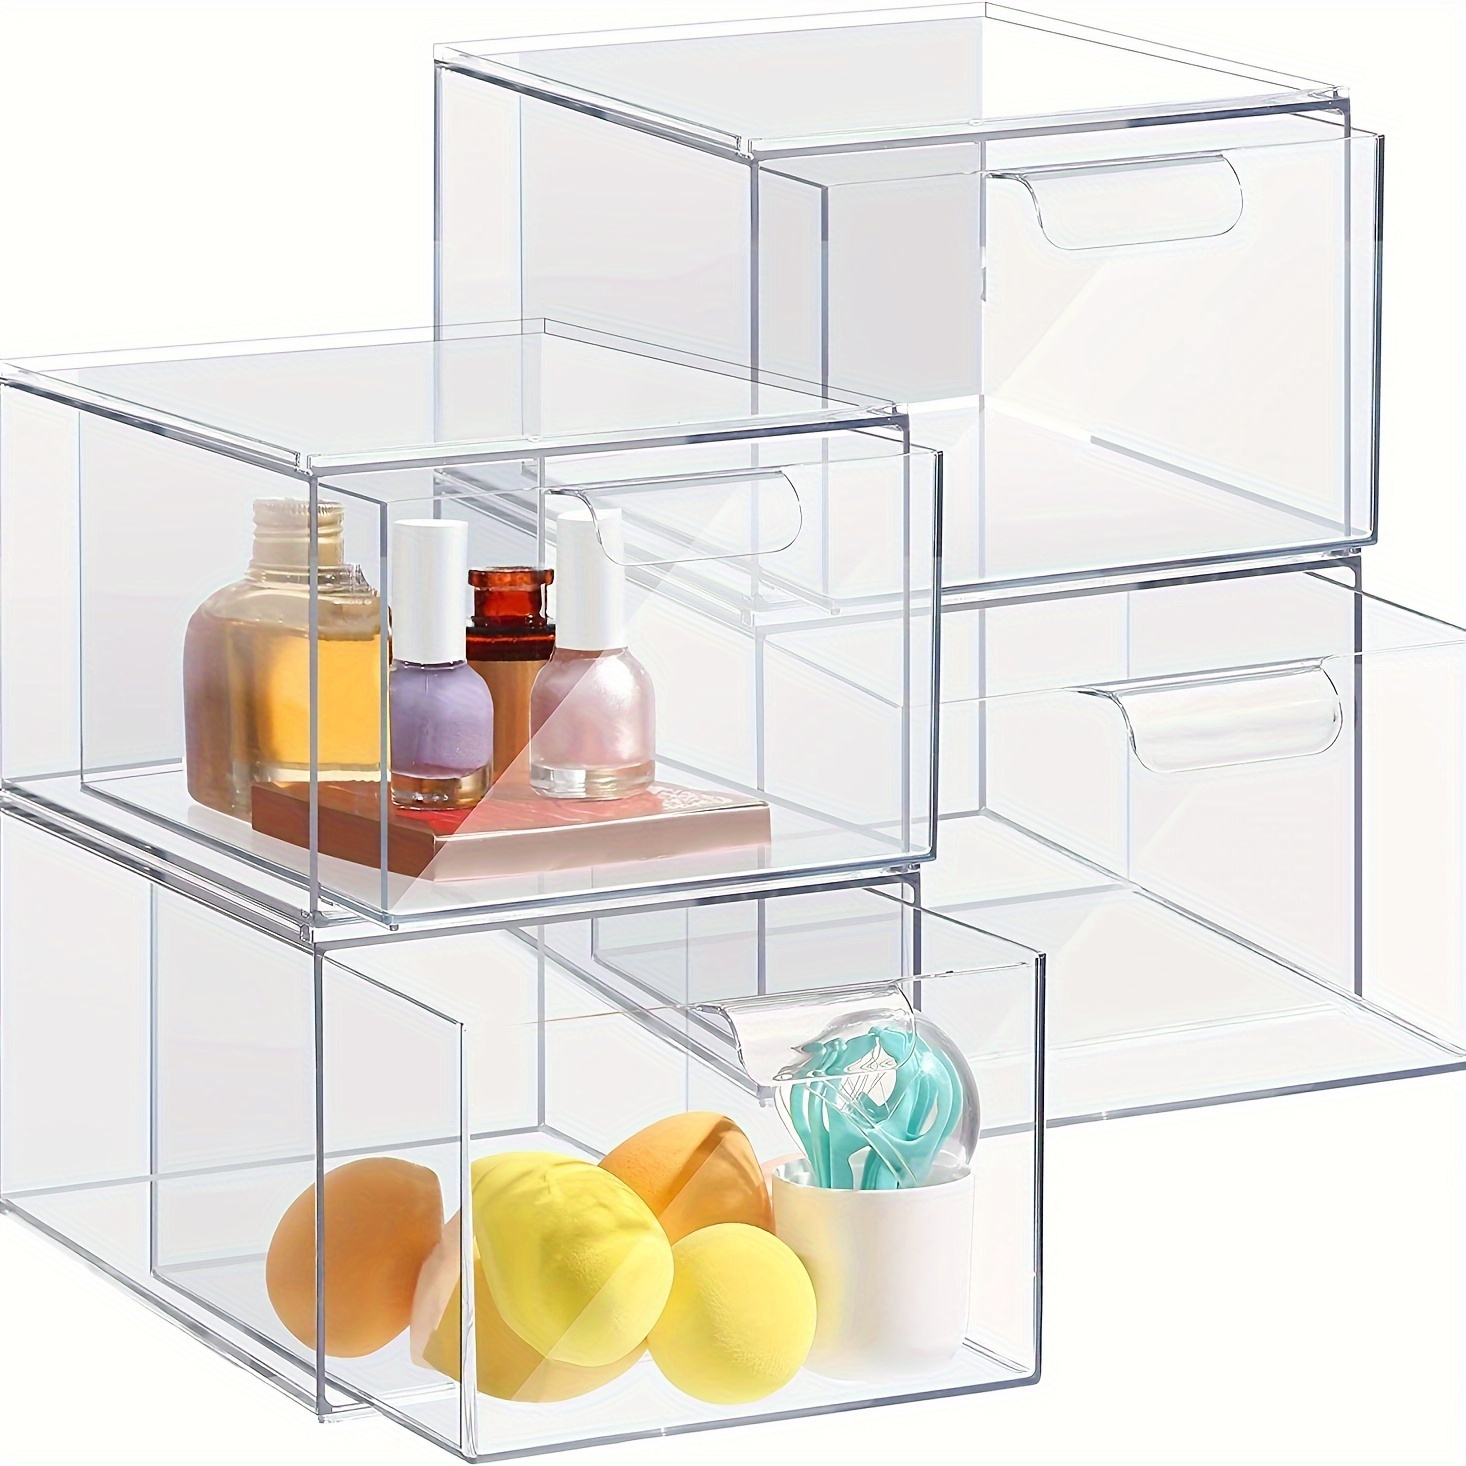 

4-pack Acrylic Clear Storage Boxes With Pull-out Drawers, Contemporary Style Plastic Organizer Bins For Office, Bedroom, Snacks, And Toys - Versatile Multipurpose Containers